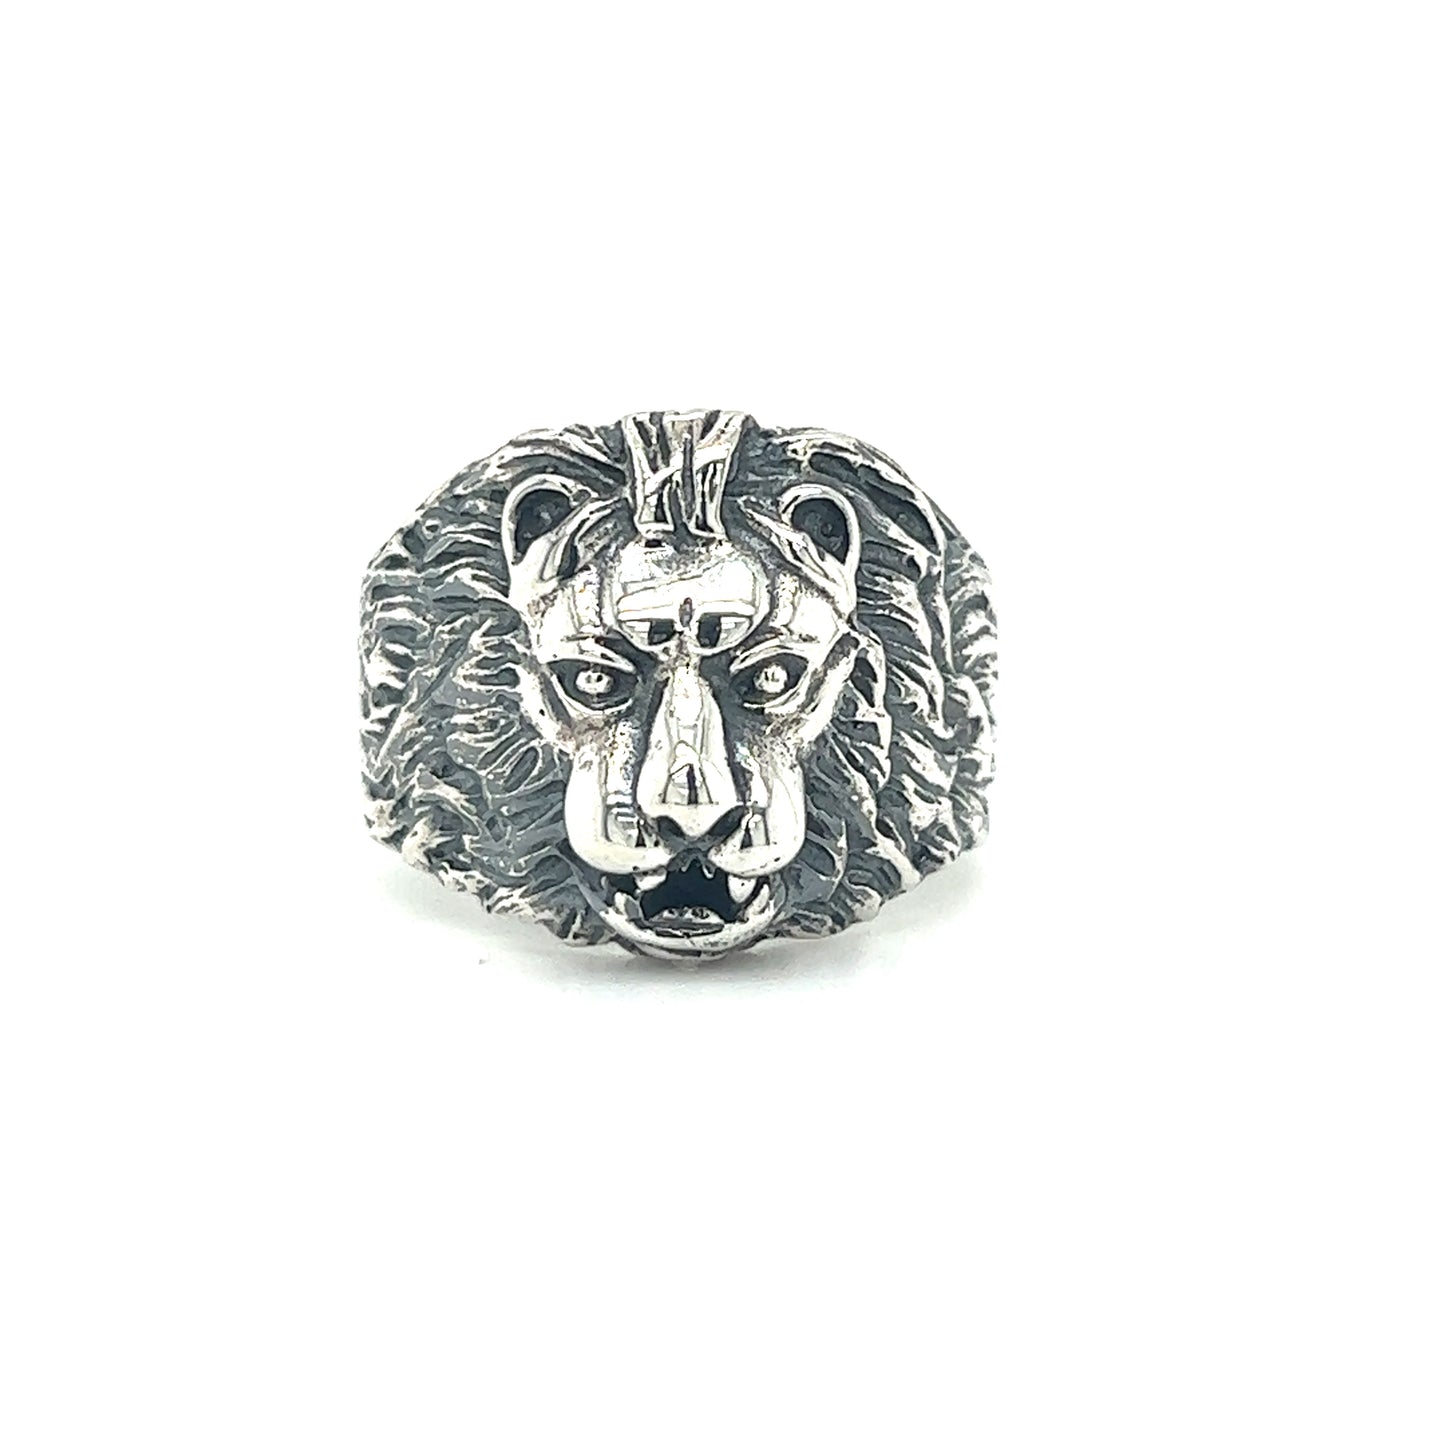 This Super Silver Silver Lion Face Ring exudes strength and authority with its stunning silver design.